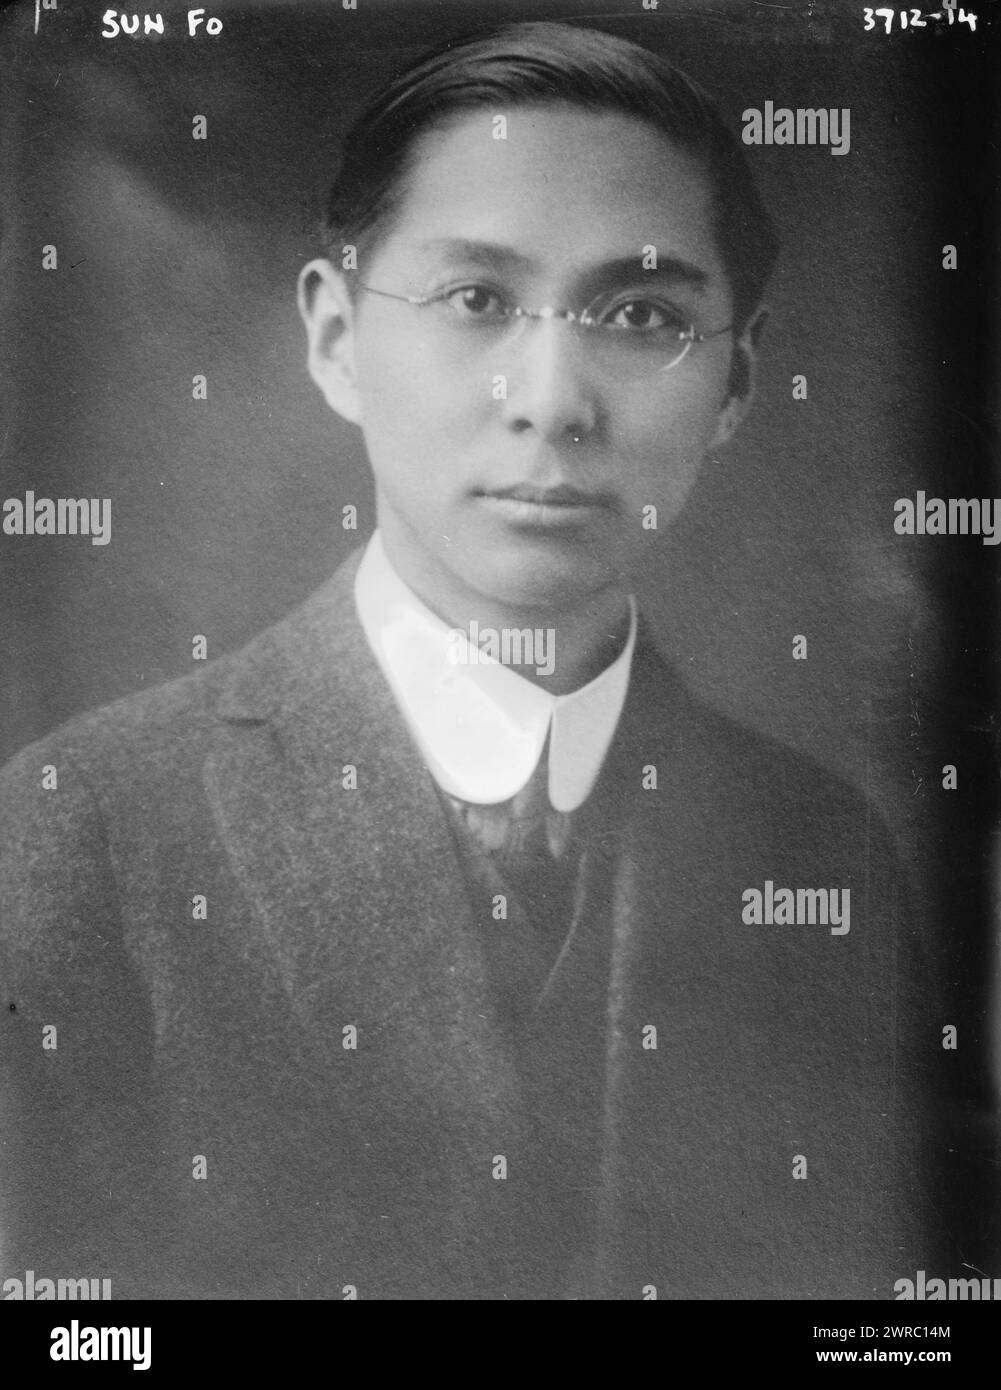 Sun Fo, 1/4/16, Photograph shows Sun Fo (1895-1973), an official in the government of the Republic of China who was the son of Chinese revolutionary Sun Yat-sen., 1/4/16, Glass negatives, 1 negative: glass Stock Photo